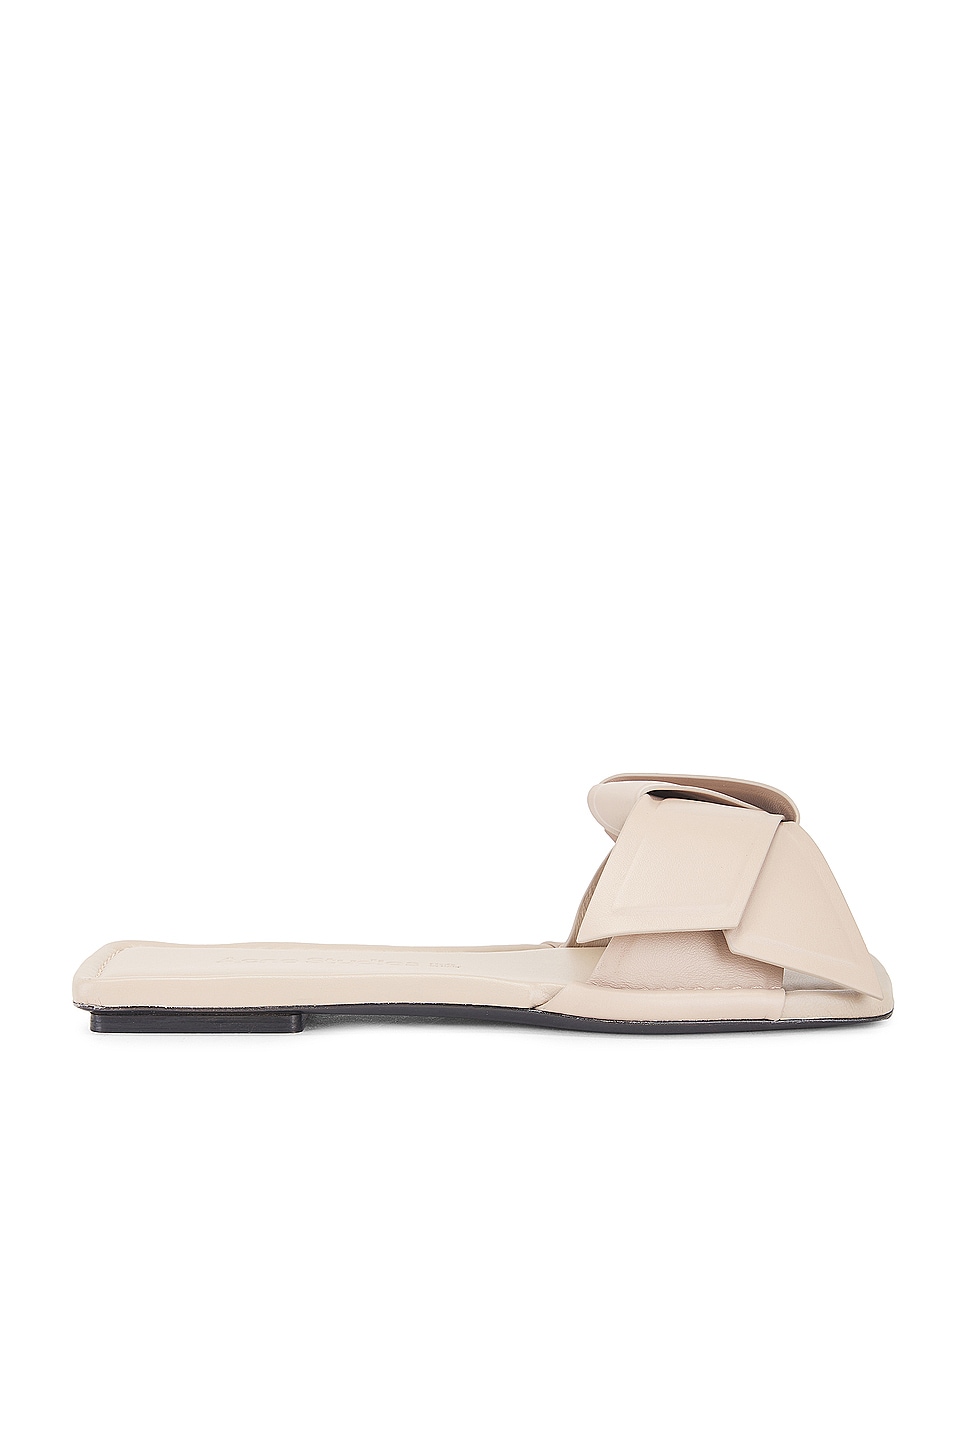 Image 1 of Acne Studios Bow Slide in Taupe Beige